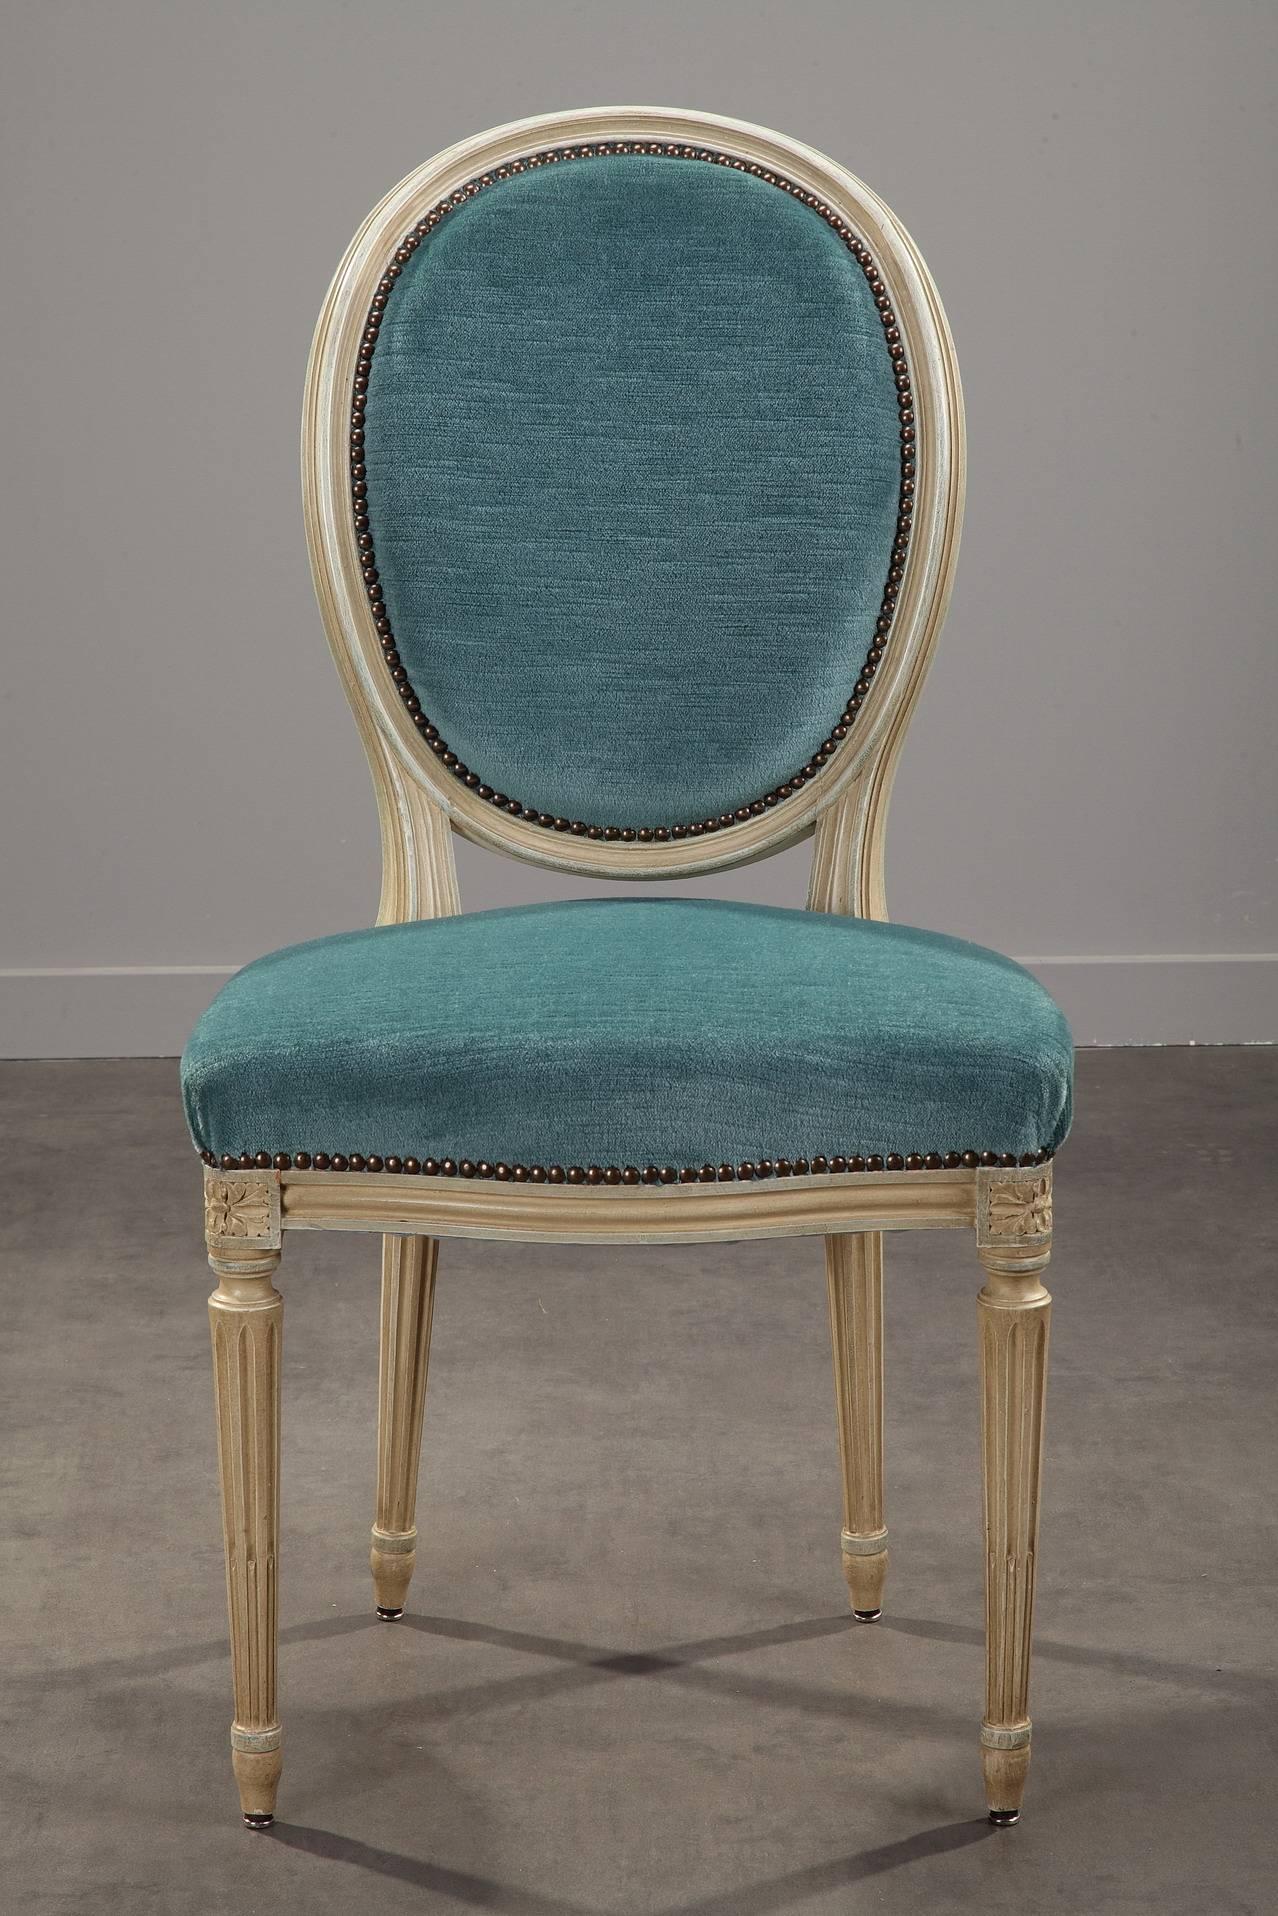 Set of eight blue velvet reupholstered chairs with green-grey lacquered structure. Each chair is set on four fluted legs, the most typical feature in the constructional details of Louis XVI furniture. The wooden structure is decorated with flutes